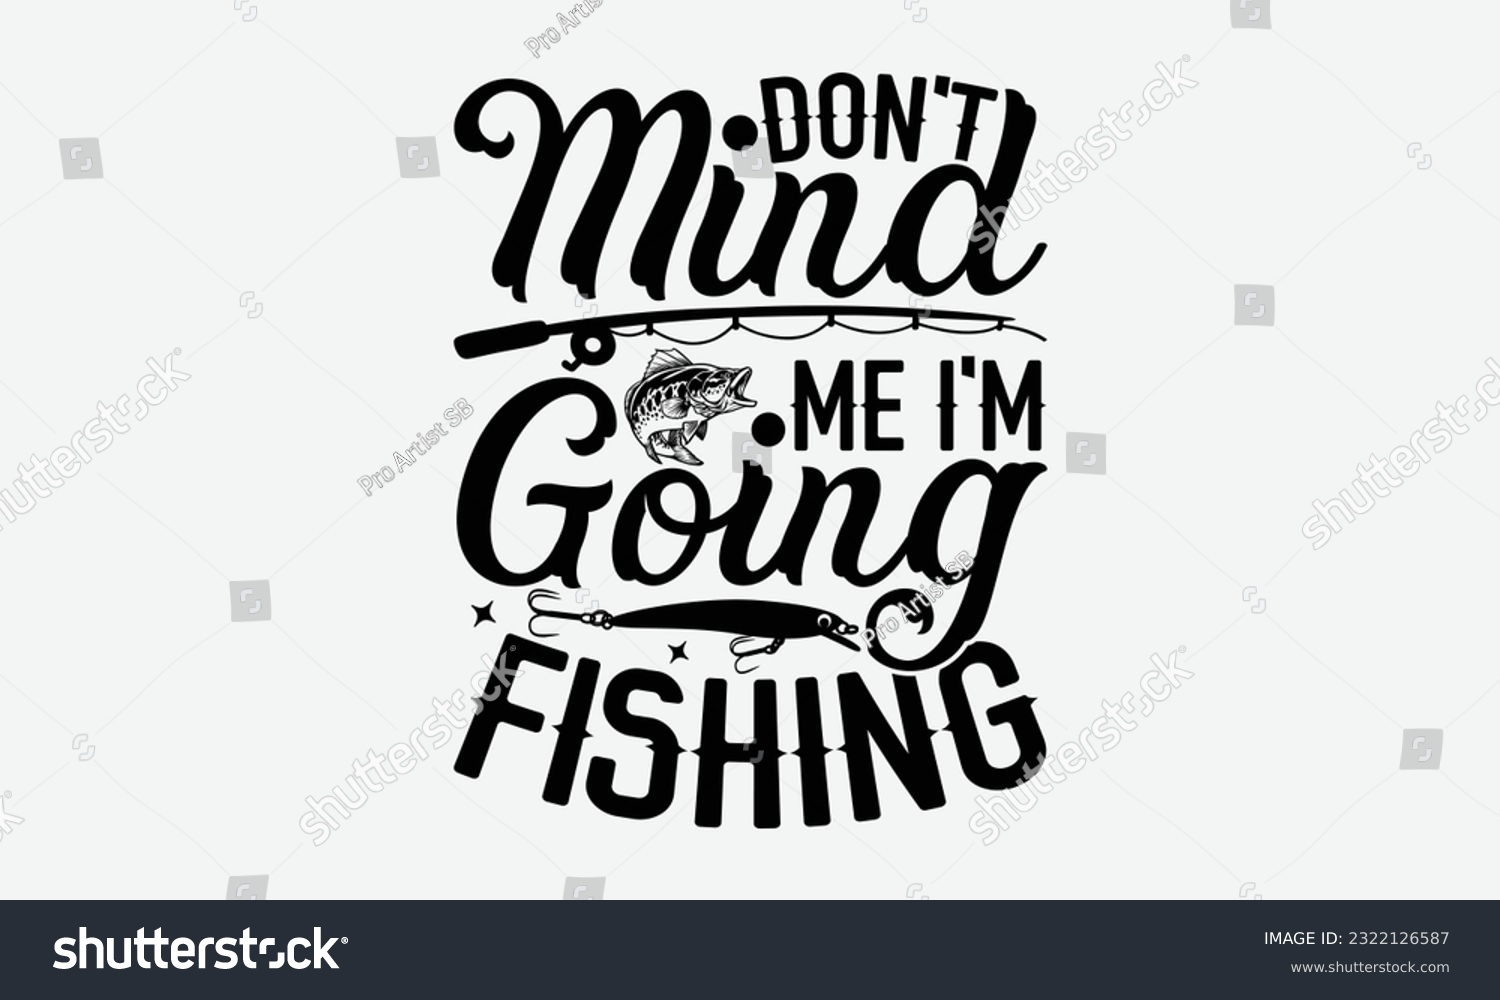 SVG of Don't Mind Me I'm Going Fishing - Fishing SVG Design, Isolated On White Background, For Cutting Machine, Silhouette Cameo, Cricut. svg